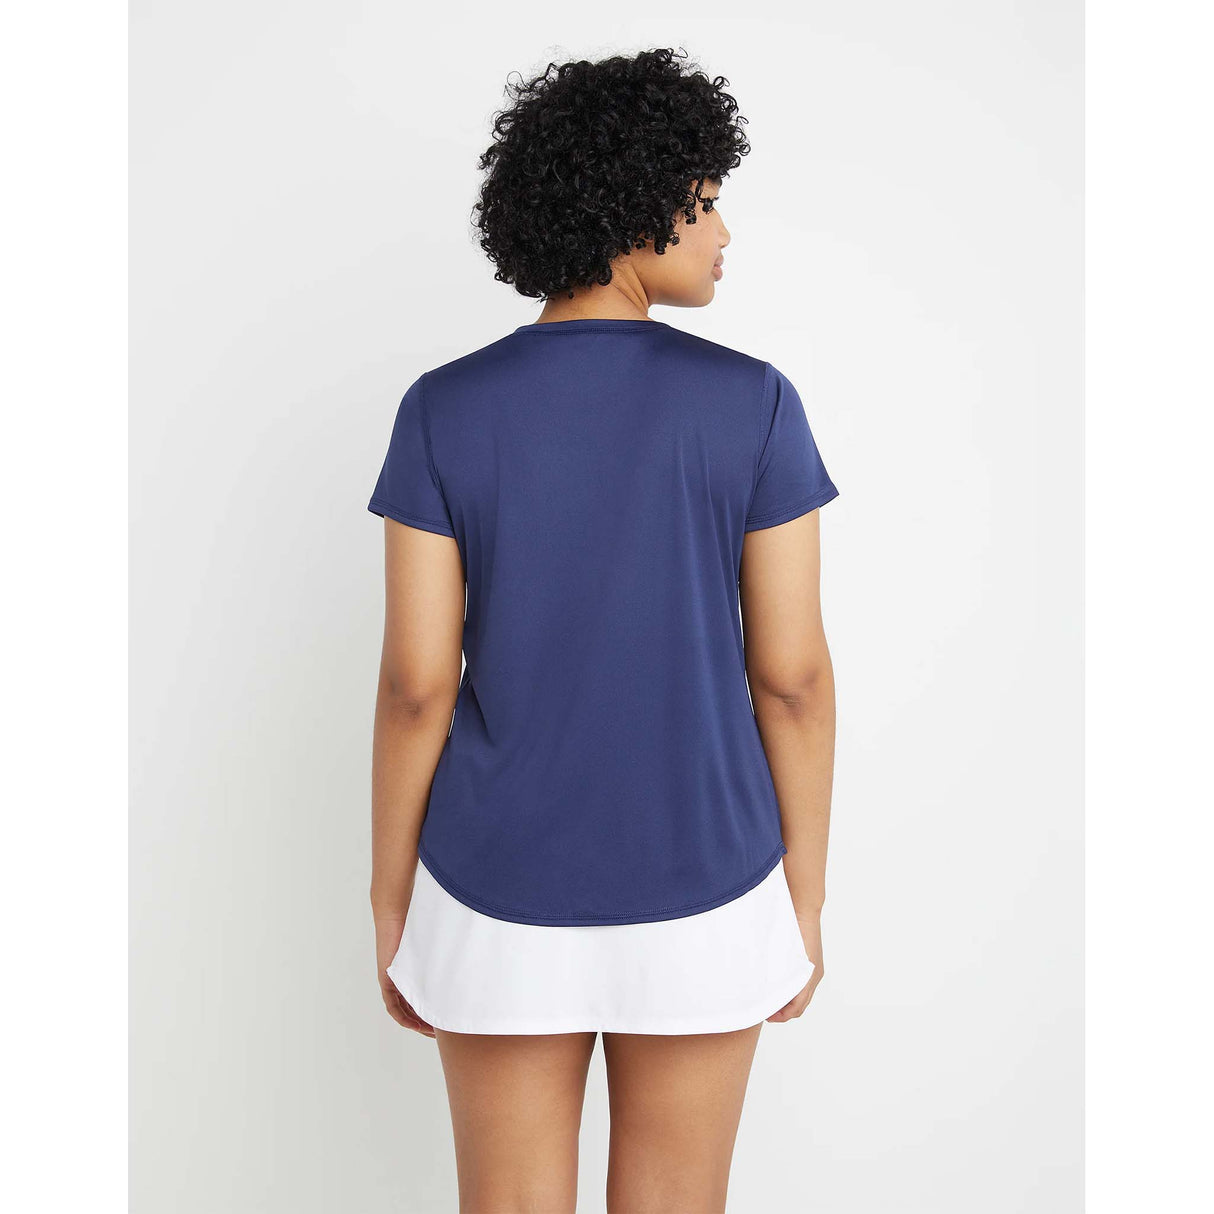 Champion Classic Sport T-shirt athletic navy femme dos